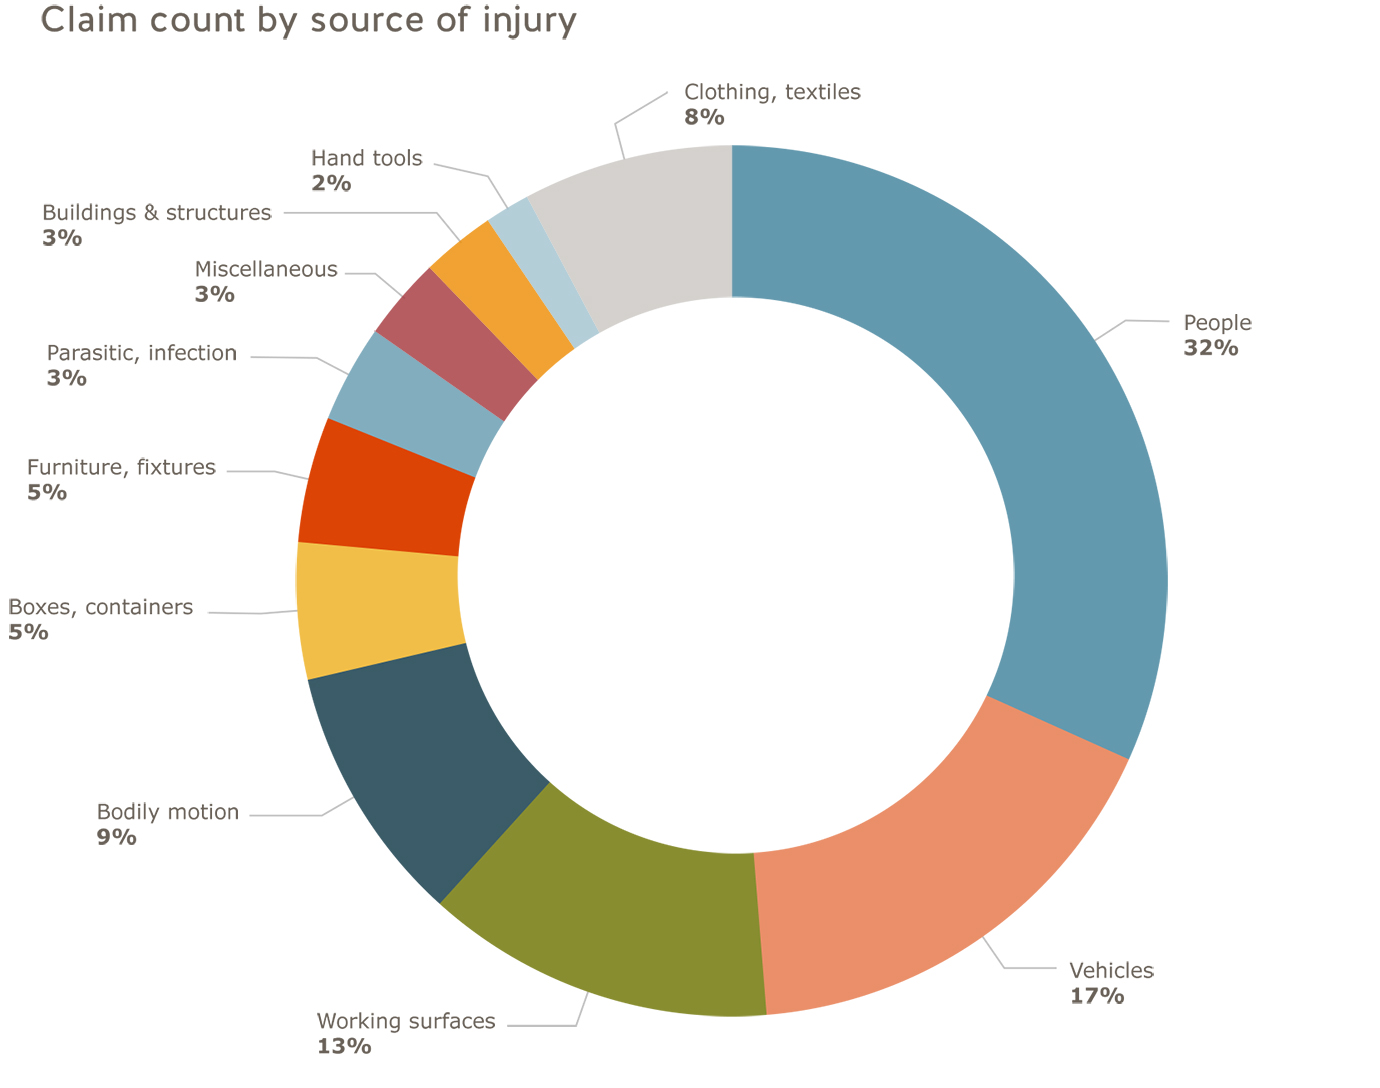 Health care and social services claim count by source of injury. People=32%; vehicles=17%; working surfaces=13%; bodily motion=9%; boxes, containers=5%; furniture, fixtures=5%; parasitic, infection=3%; miscellaneous=3%; buildings and structures=3%; hand tools=2%; clothing, textiles = 8%